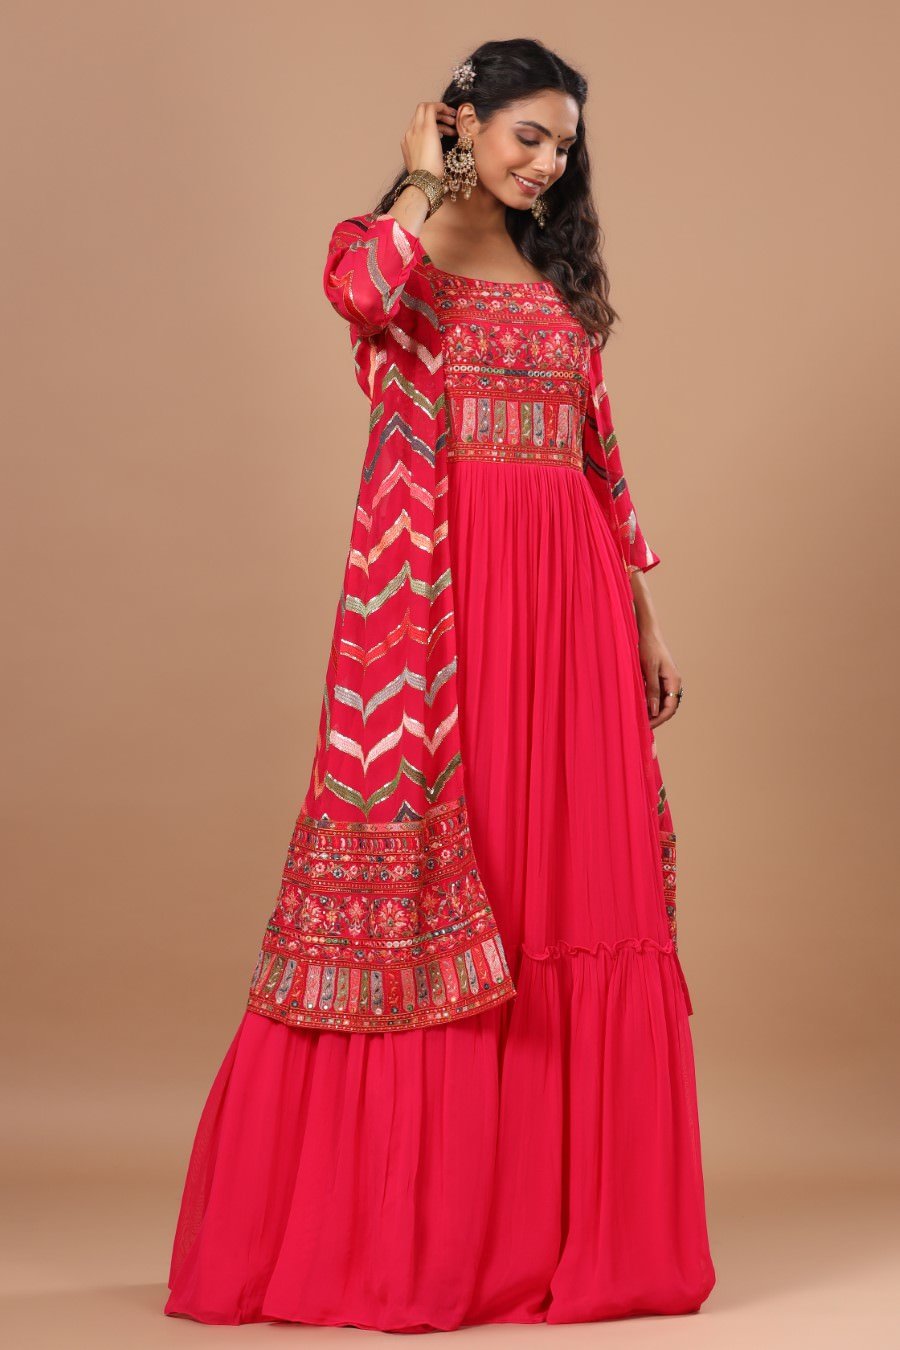 Alluring Rani Pink Resham Embroidered Dress with Cape